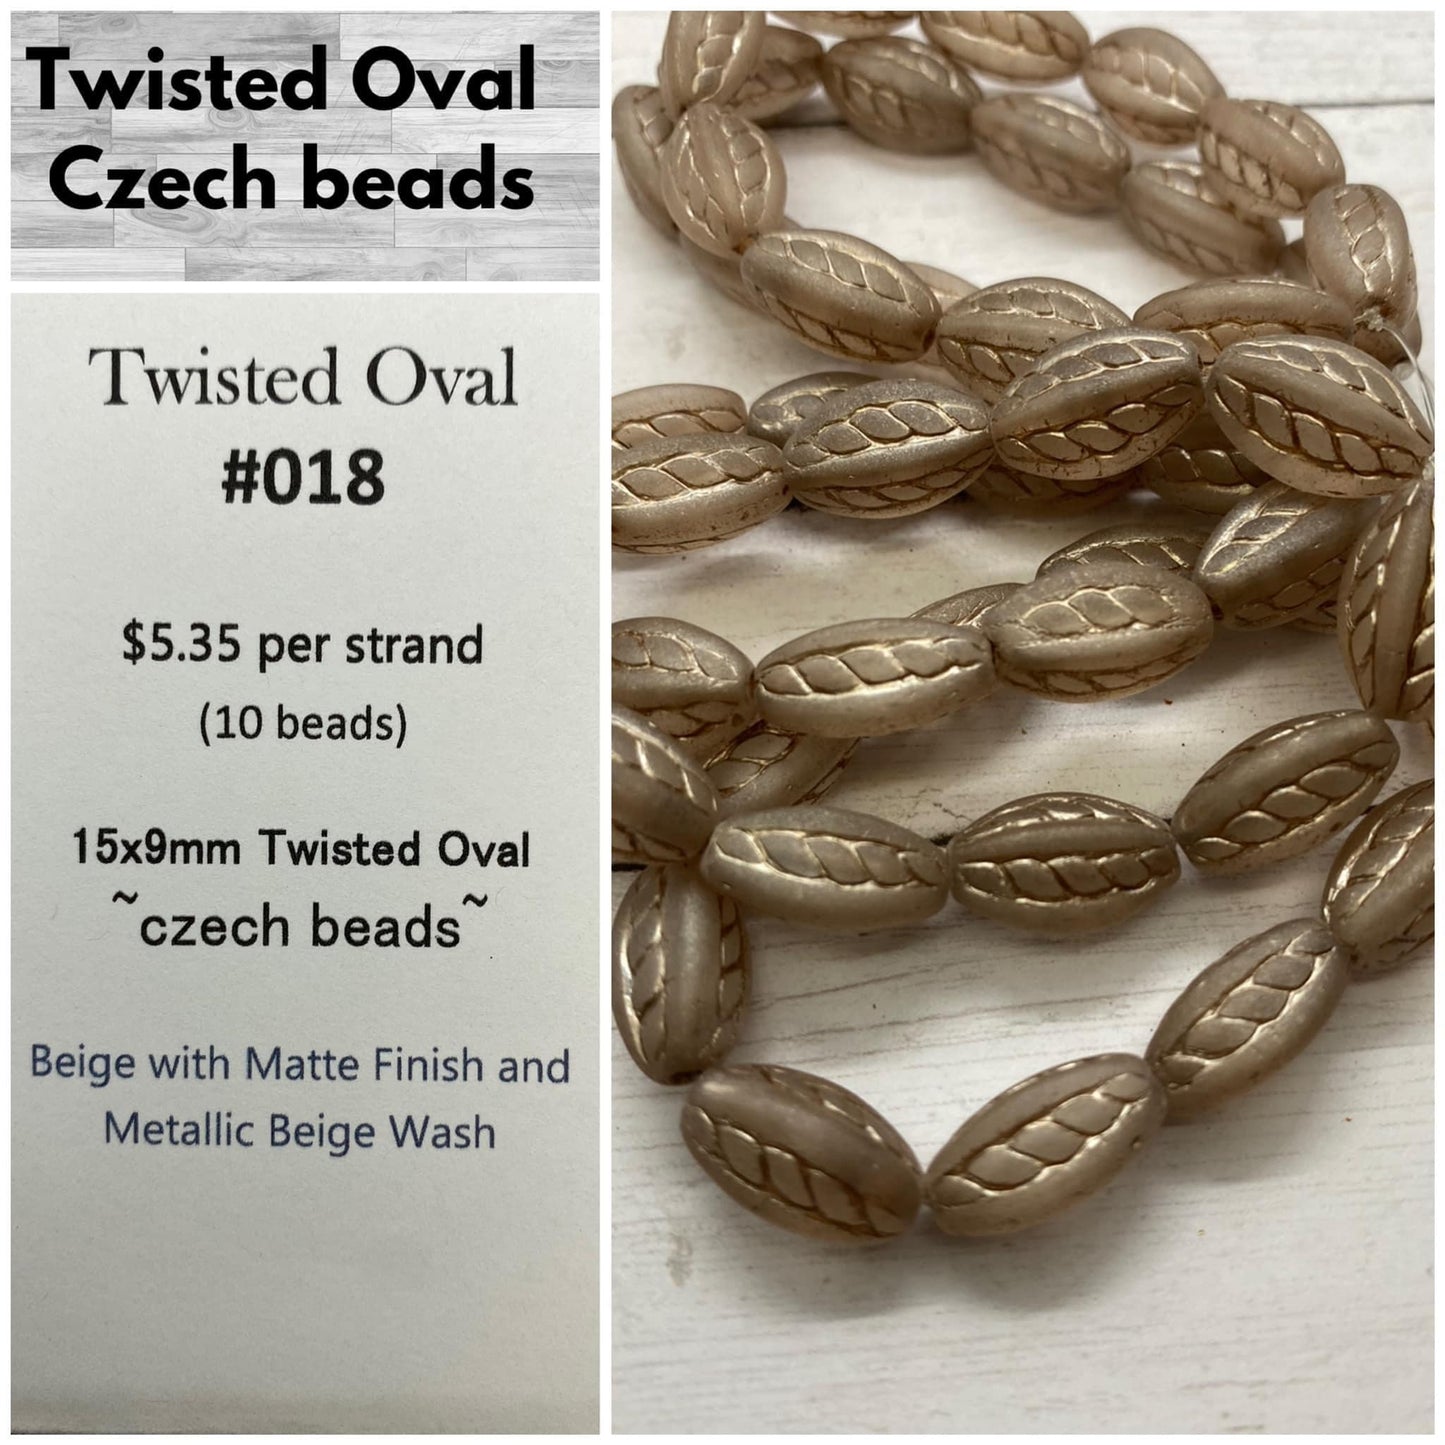 Twisted Oval 15x9mm #018